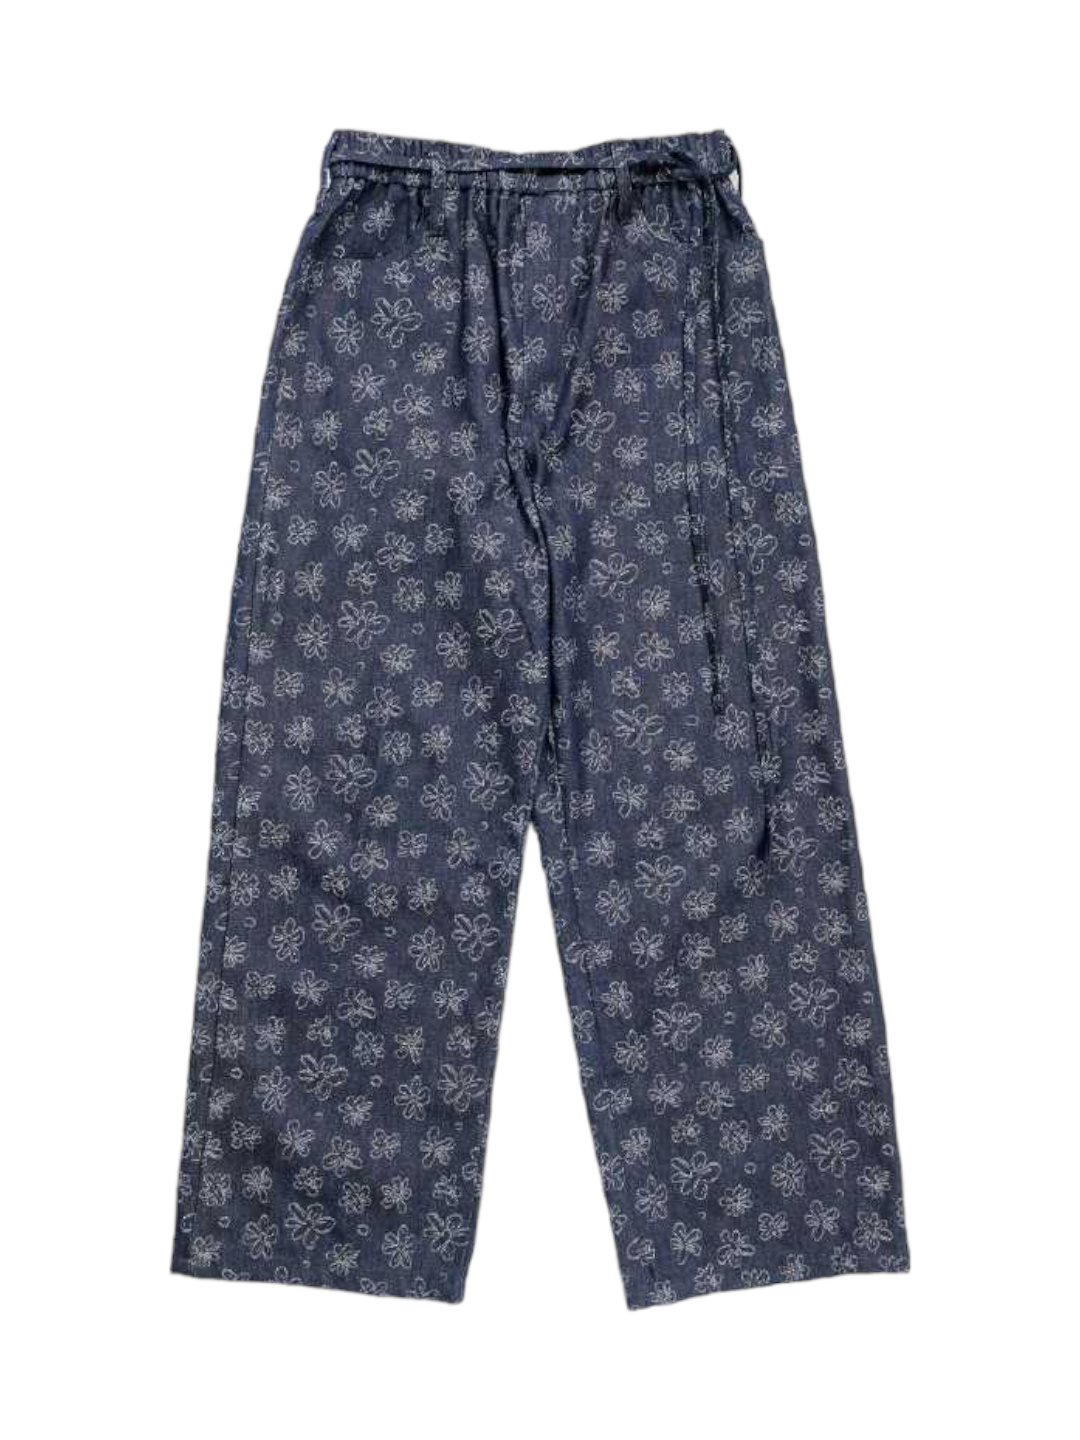 CLUB ✿ 12 Club Wide-Legs Relaxed Denim Pants in Floral Navy